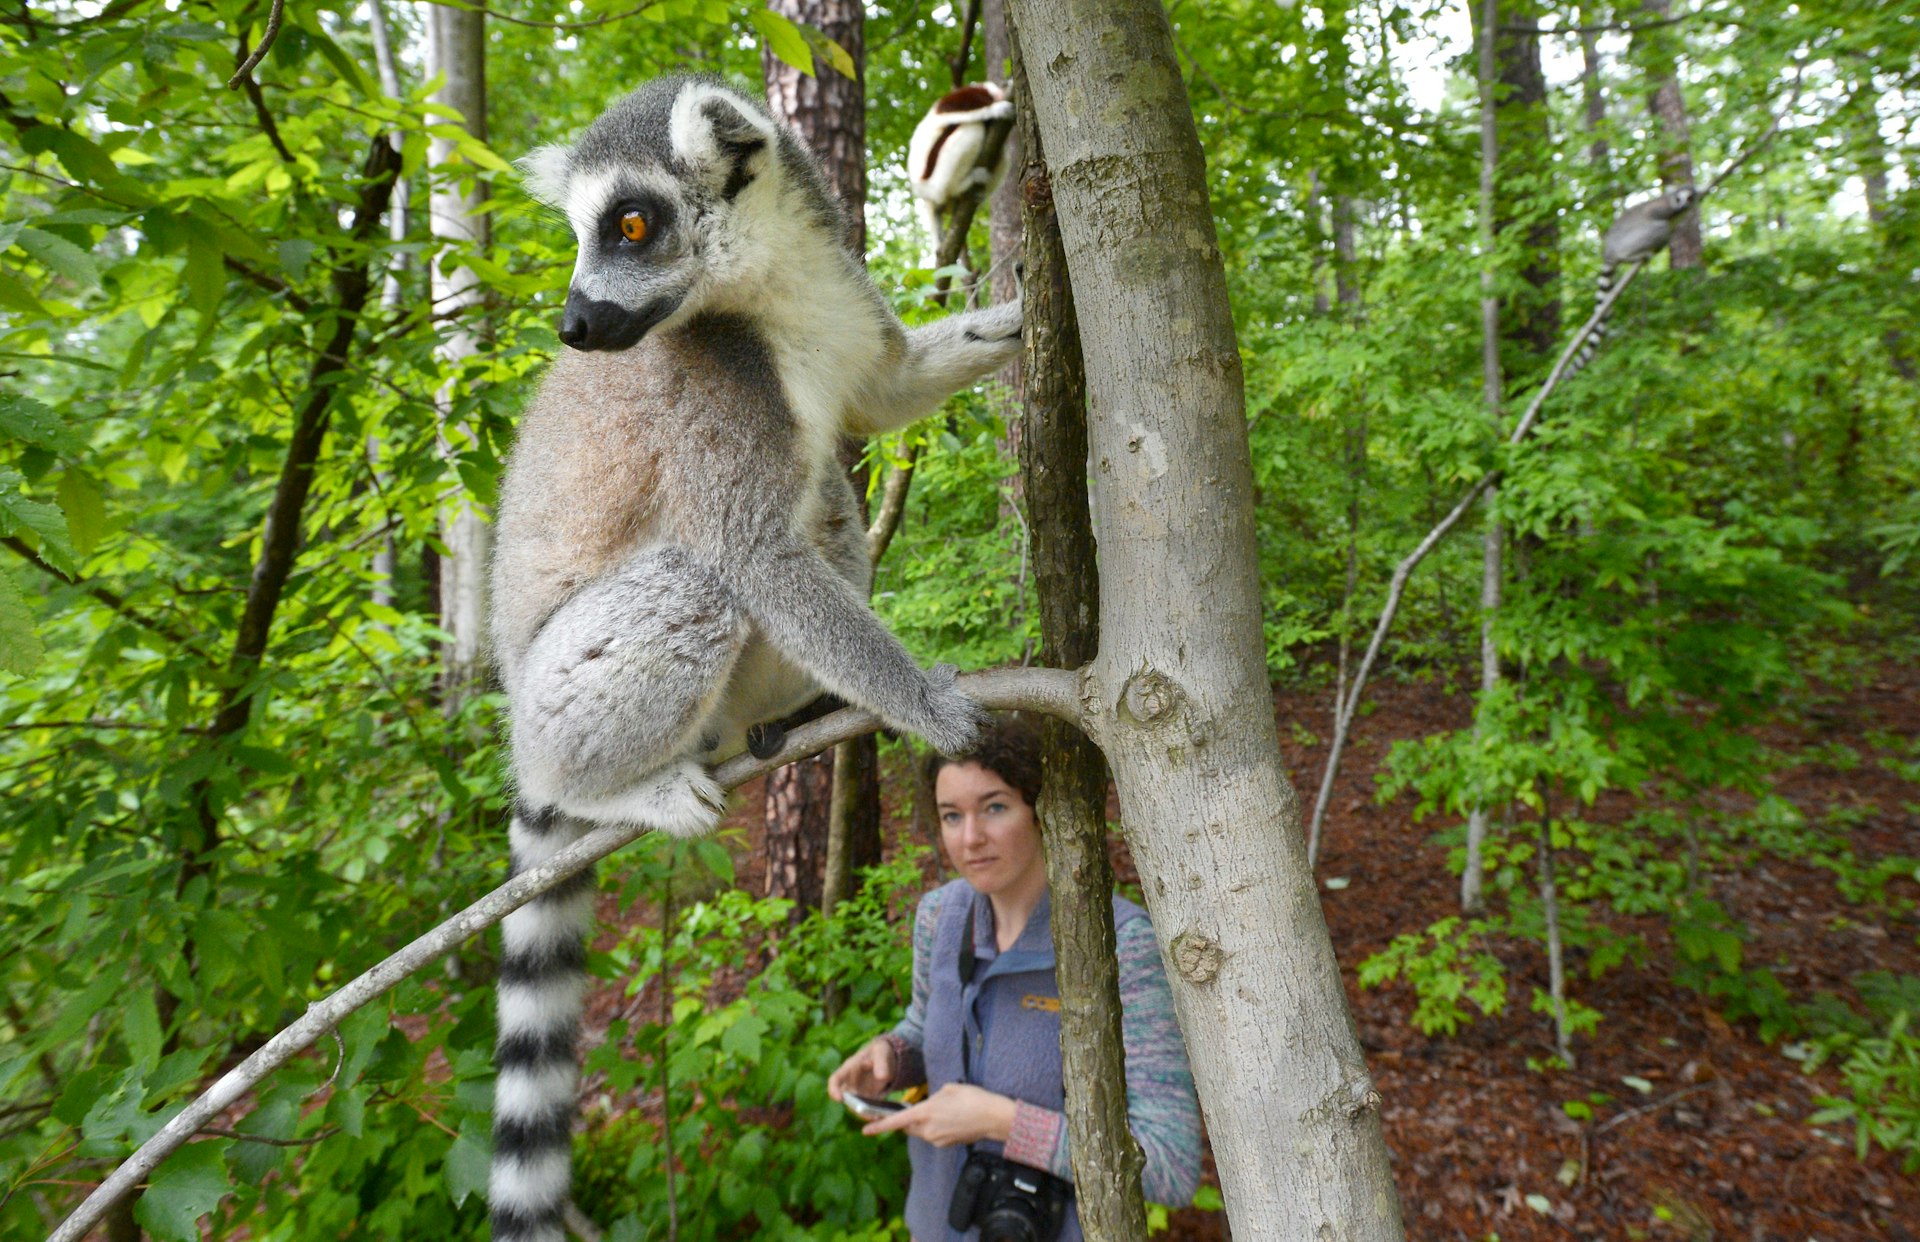 A lemur looks off to the left as it stands on a tree branch. There is a woman carrying a camera looking up at the lemur in the forest. 